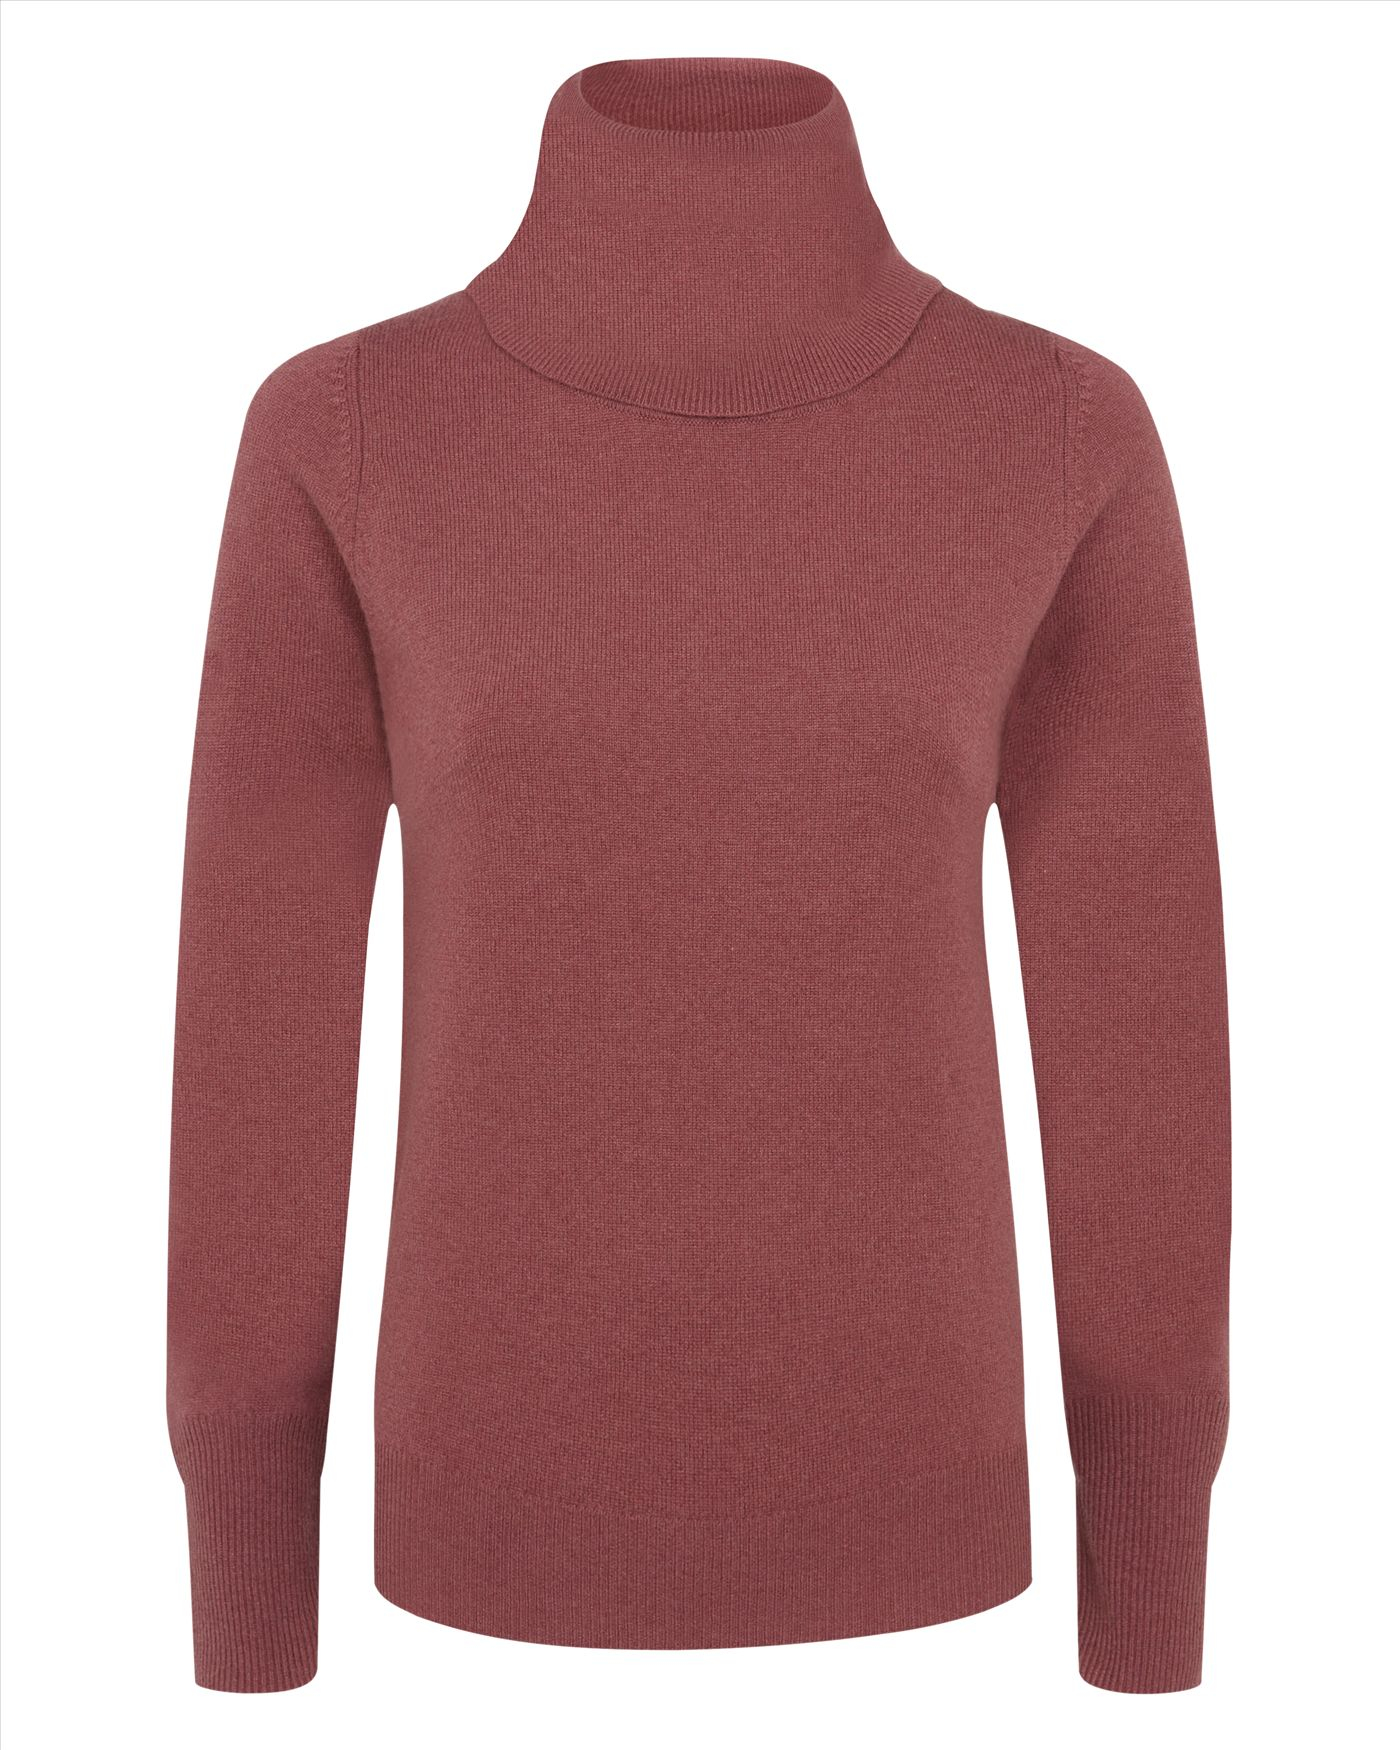 Lyst - Jaeger Cashmere Cowl Neck Sweater in Pink